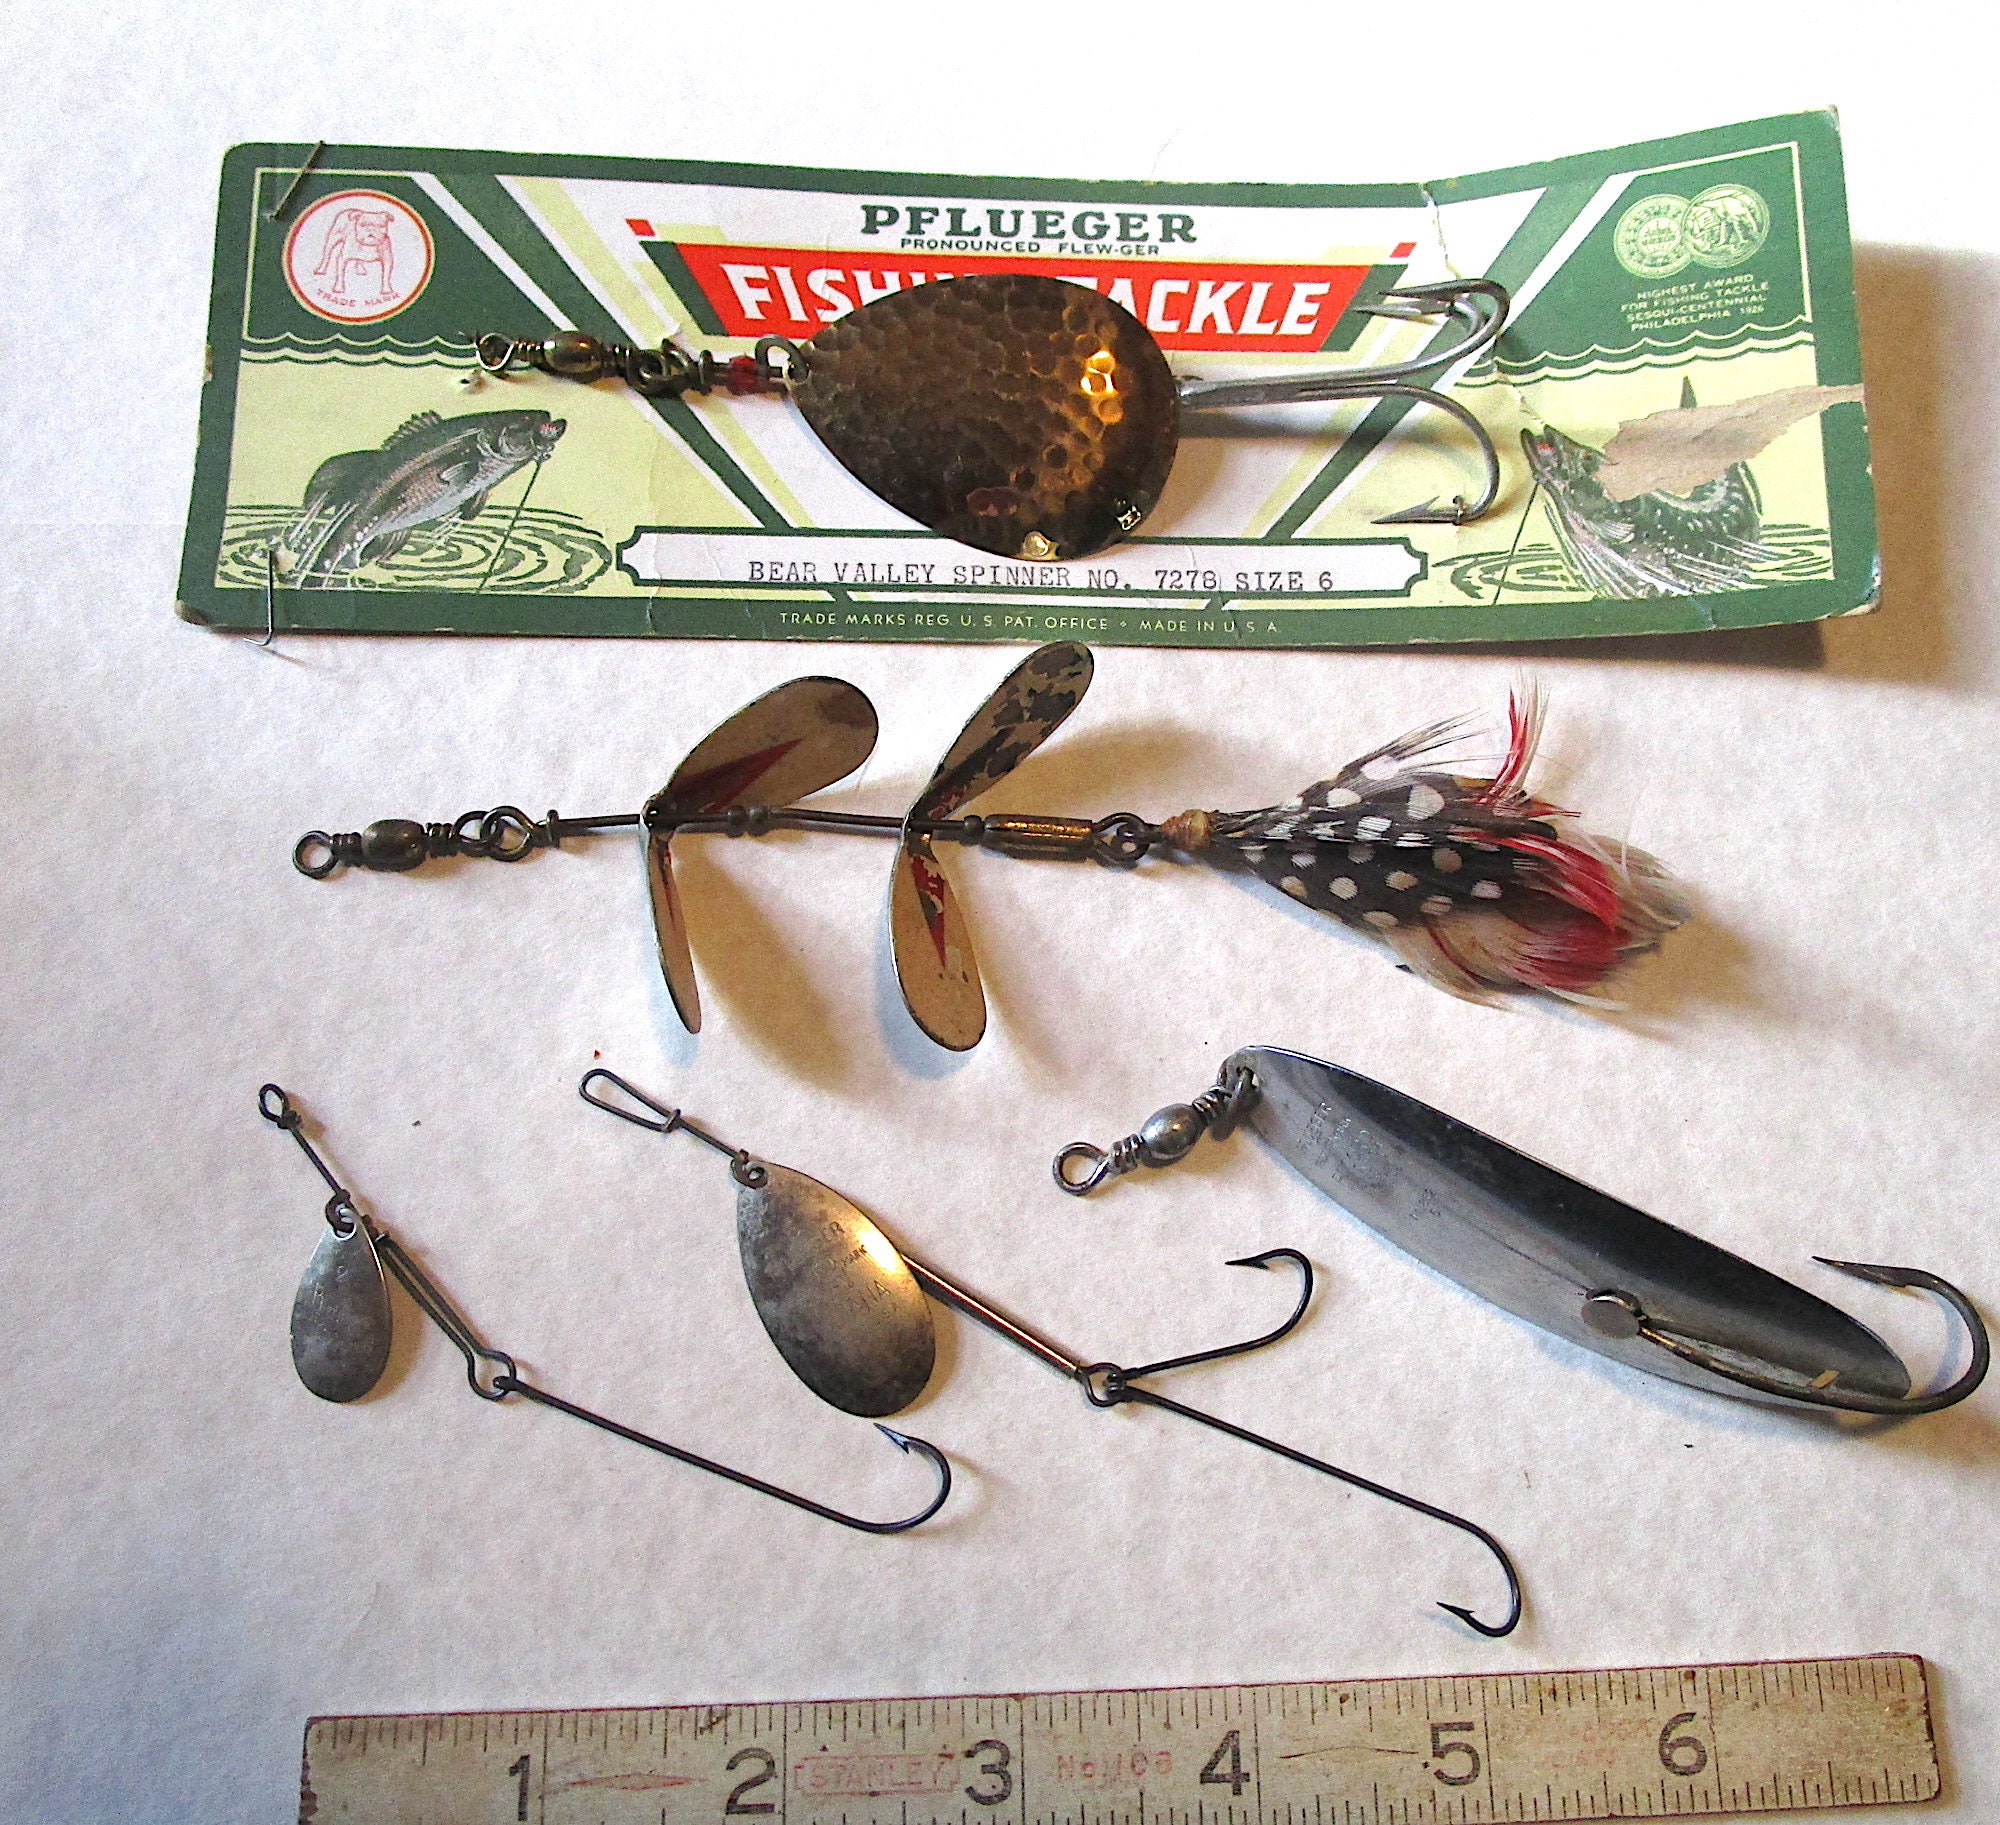 6 Pc Lot Lures Vintage Fishing Lures Used Old Fishing Gear Spoon